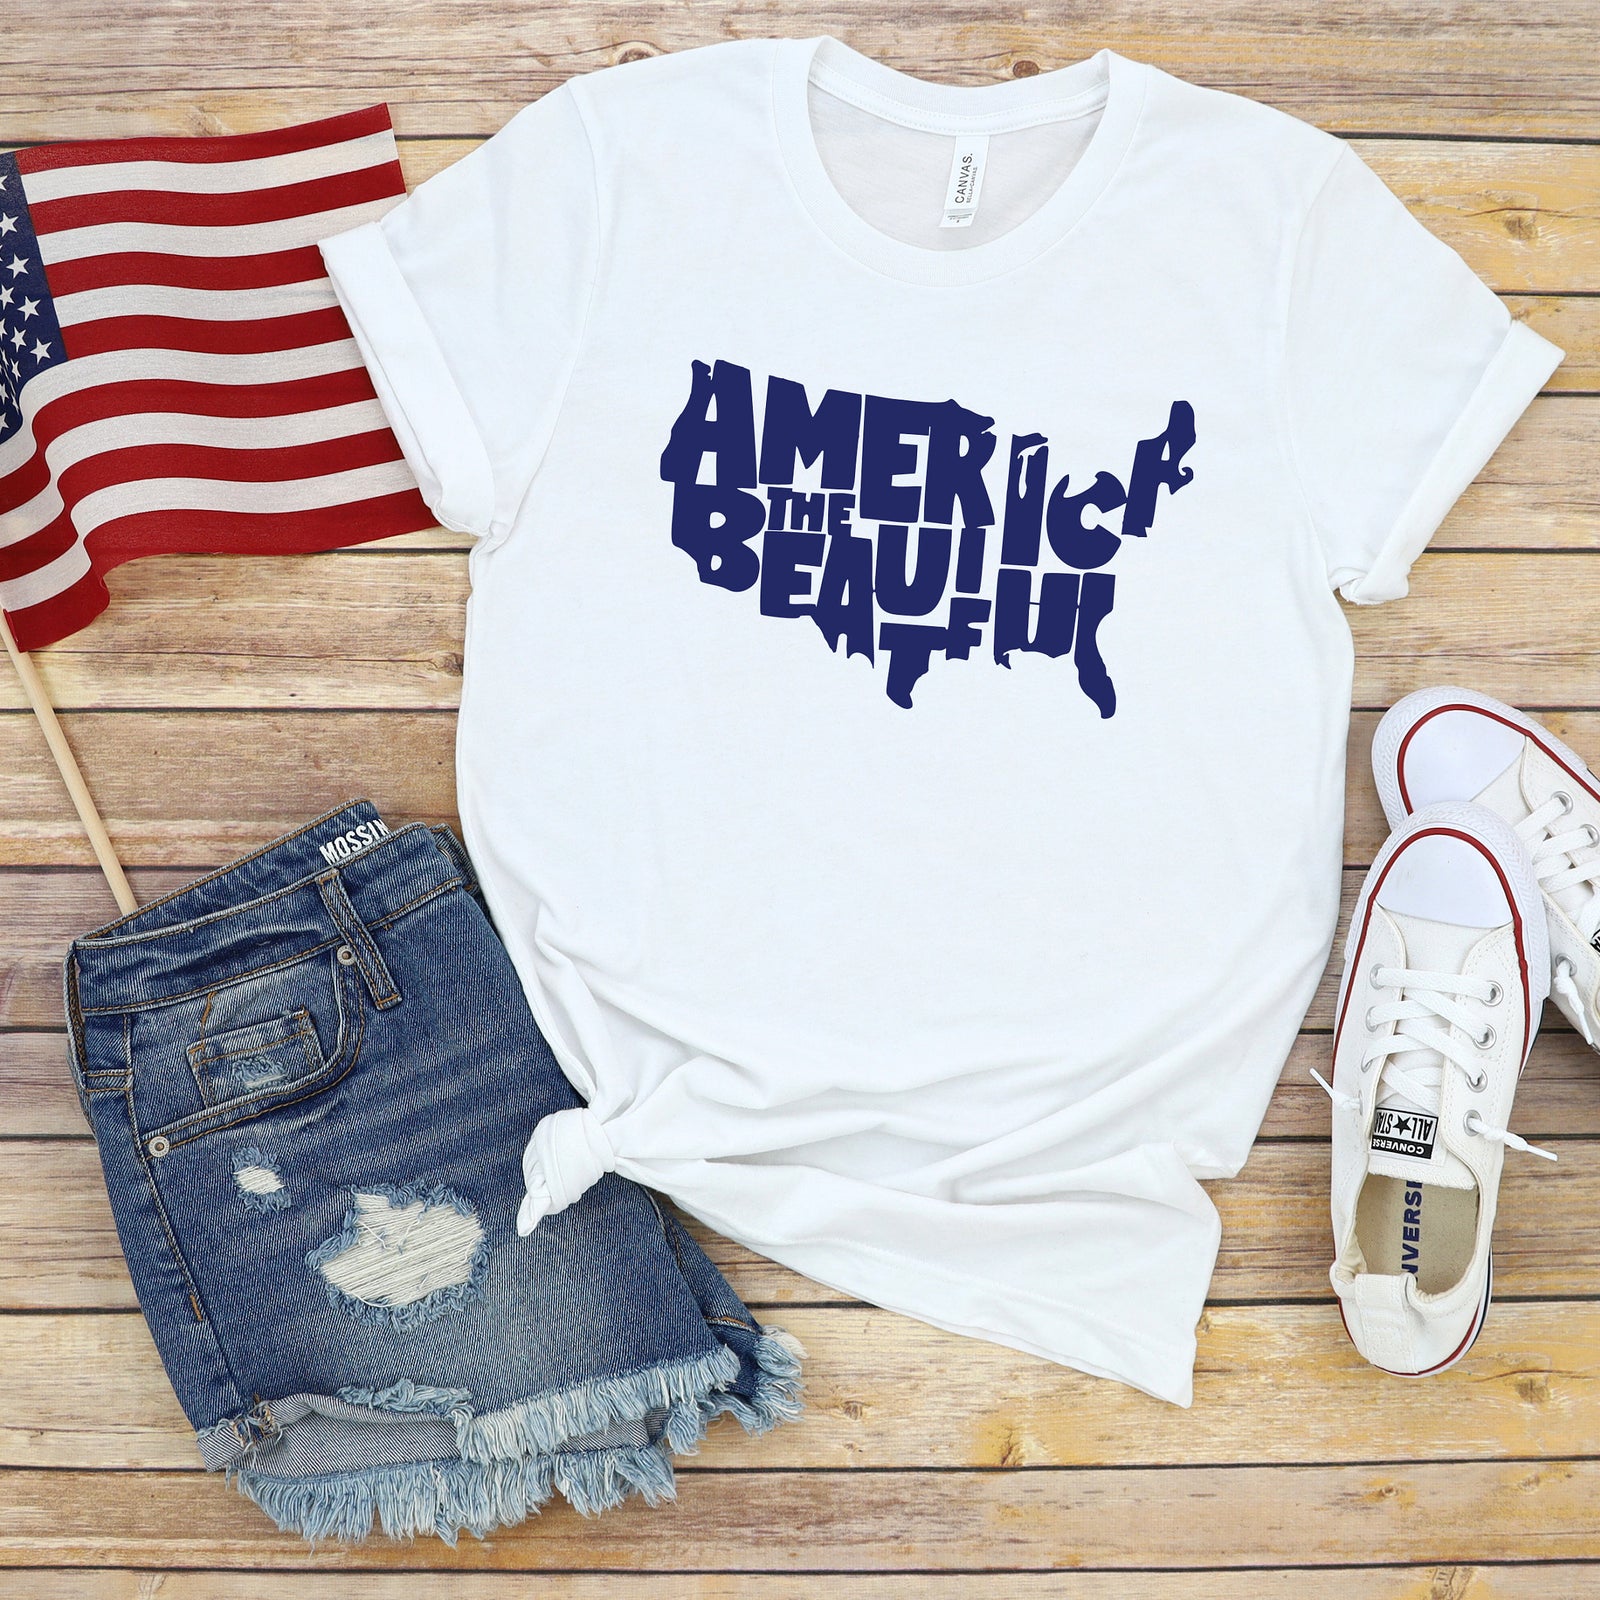 America the Beautiful Map - Fourth of July Adult T Shirt - Independence Day - Memorial - Red White and Blue USA